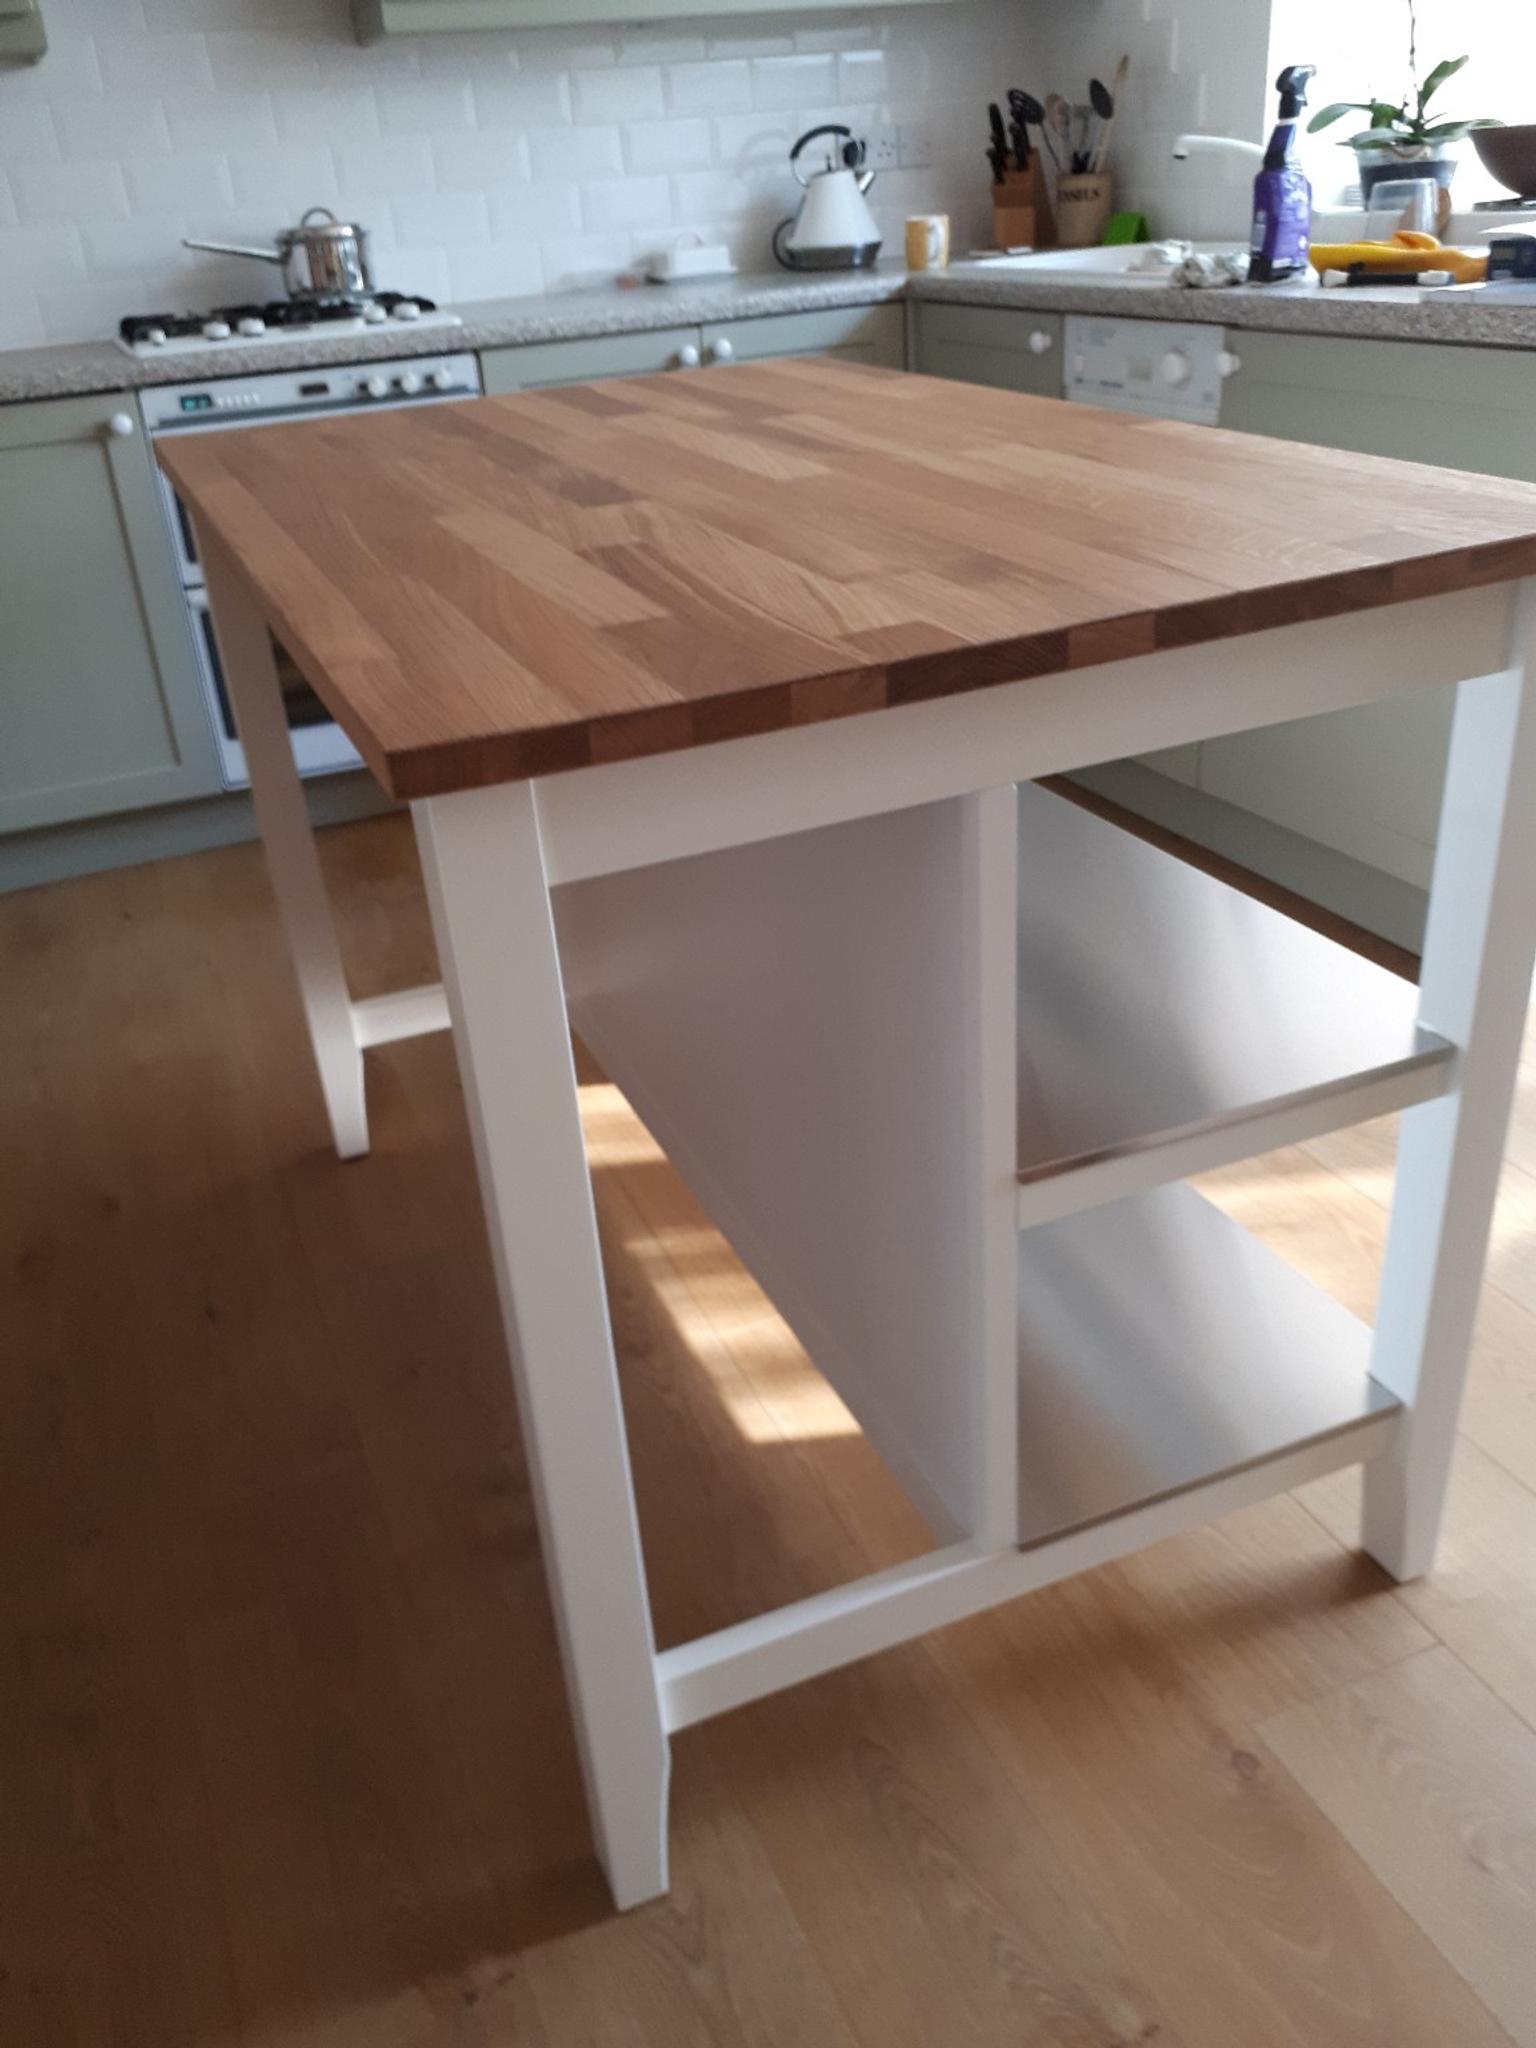 Ikea Stenstorp Kitchen Island In Ch63 Wirral For 200 00 For Sale